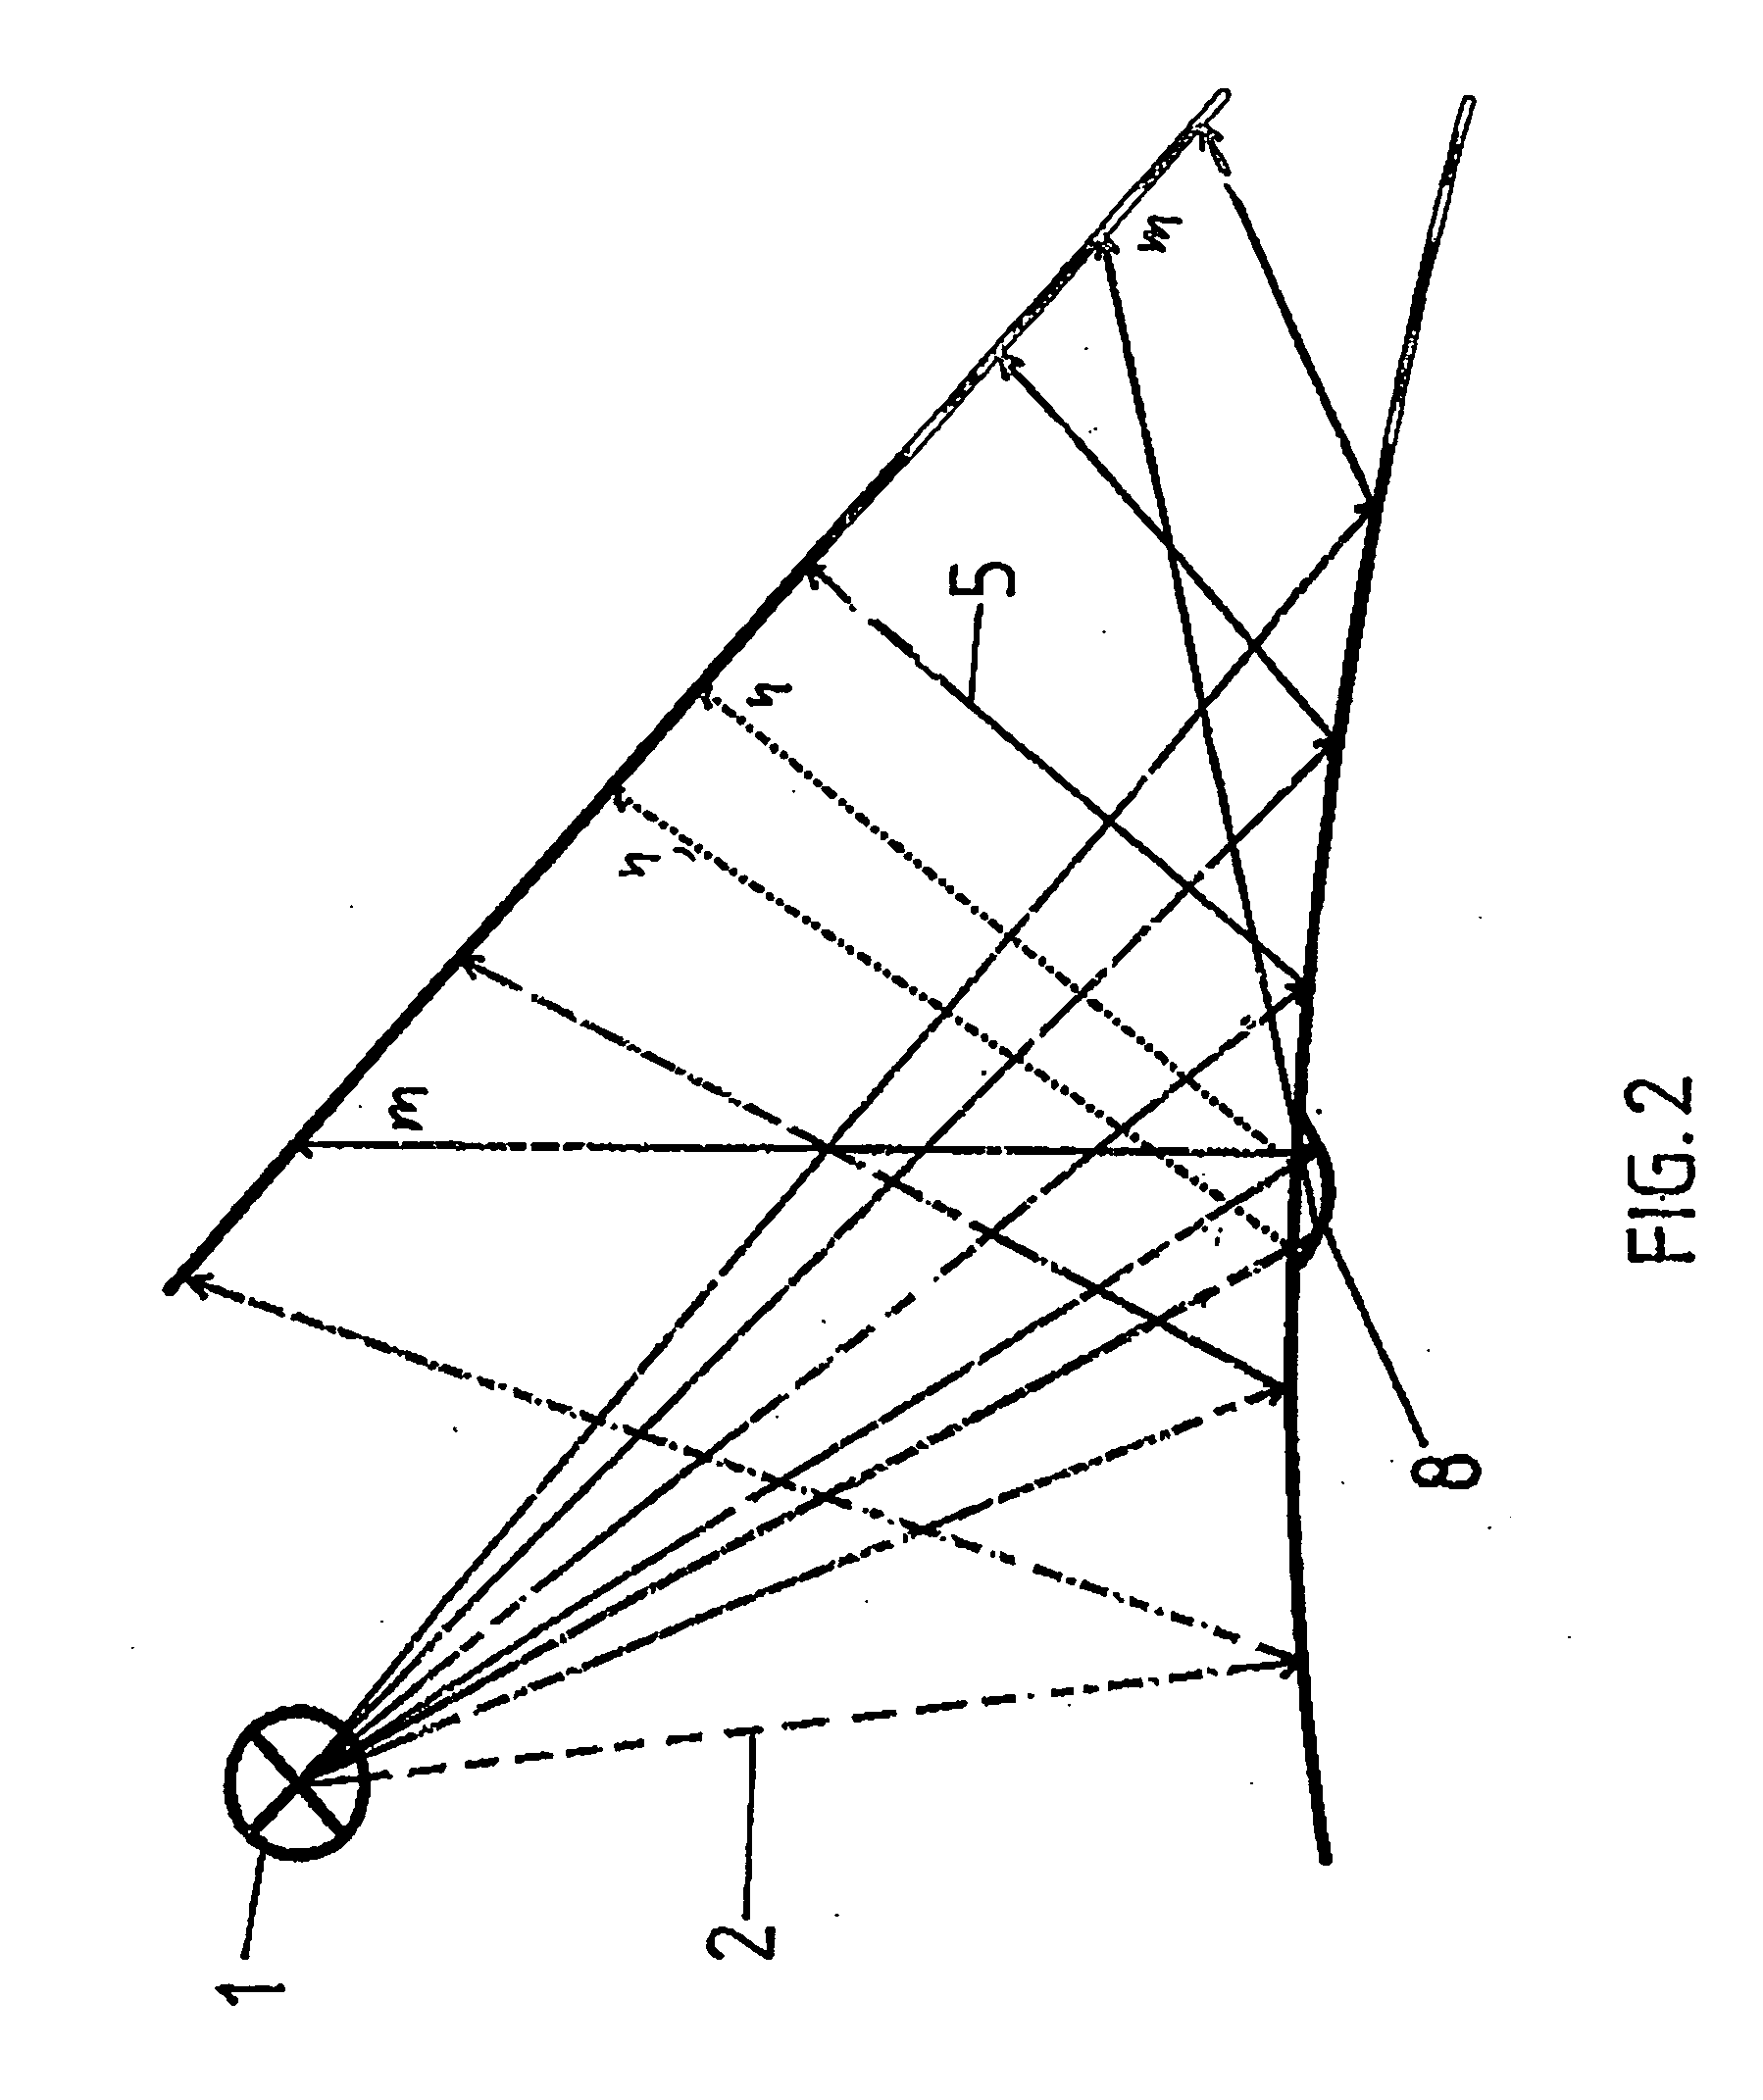 Method and device for detecting, determining and documenting damage, especially deformations in lacquered surfaces caused by sudden events